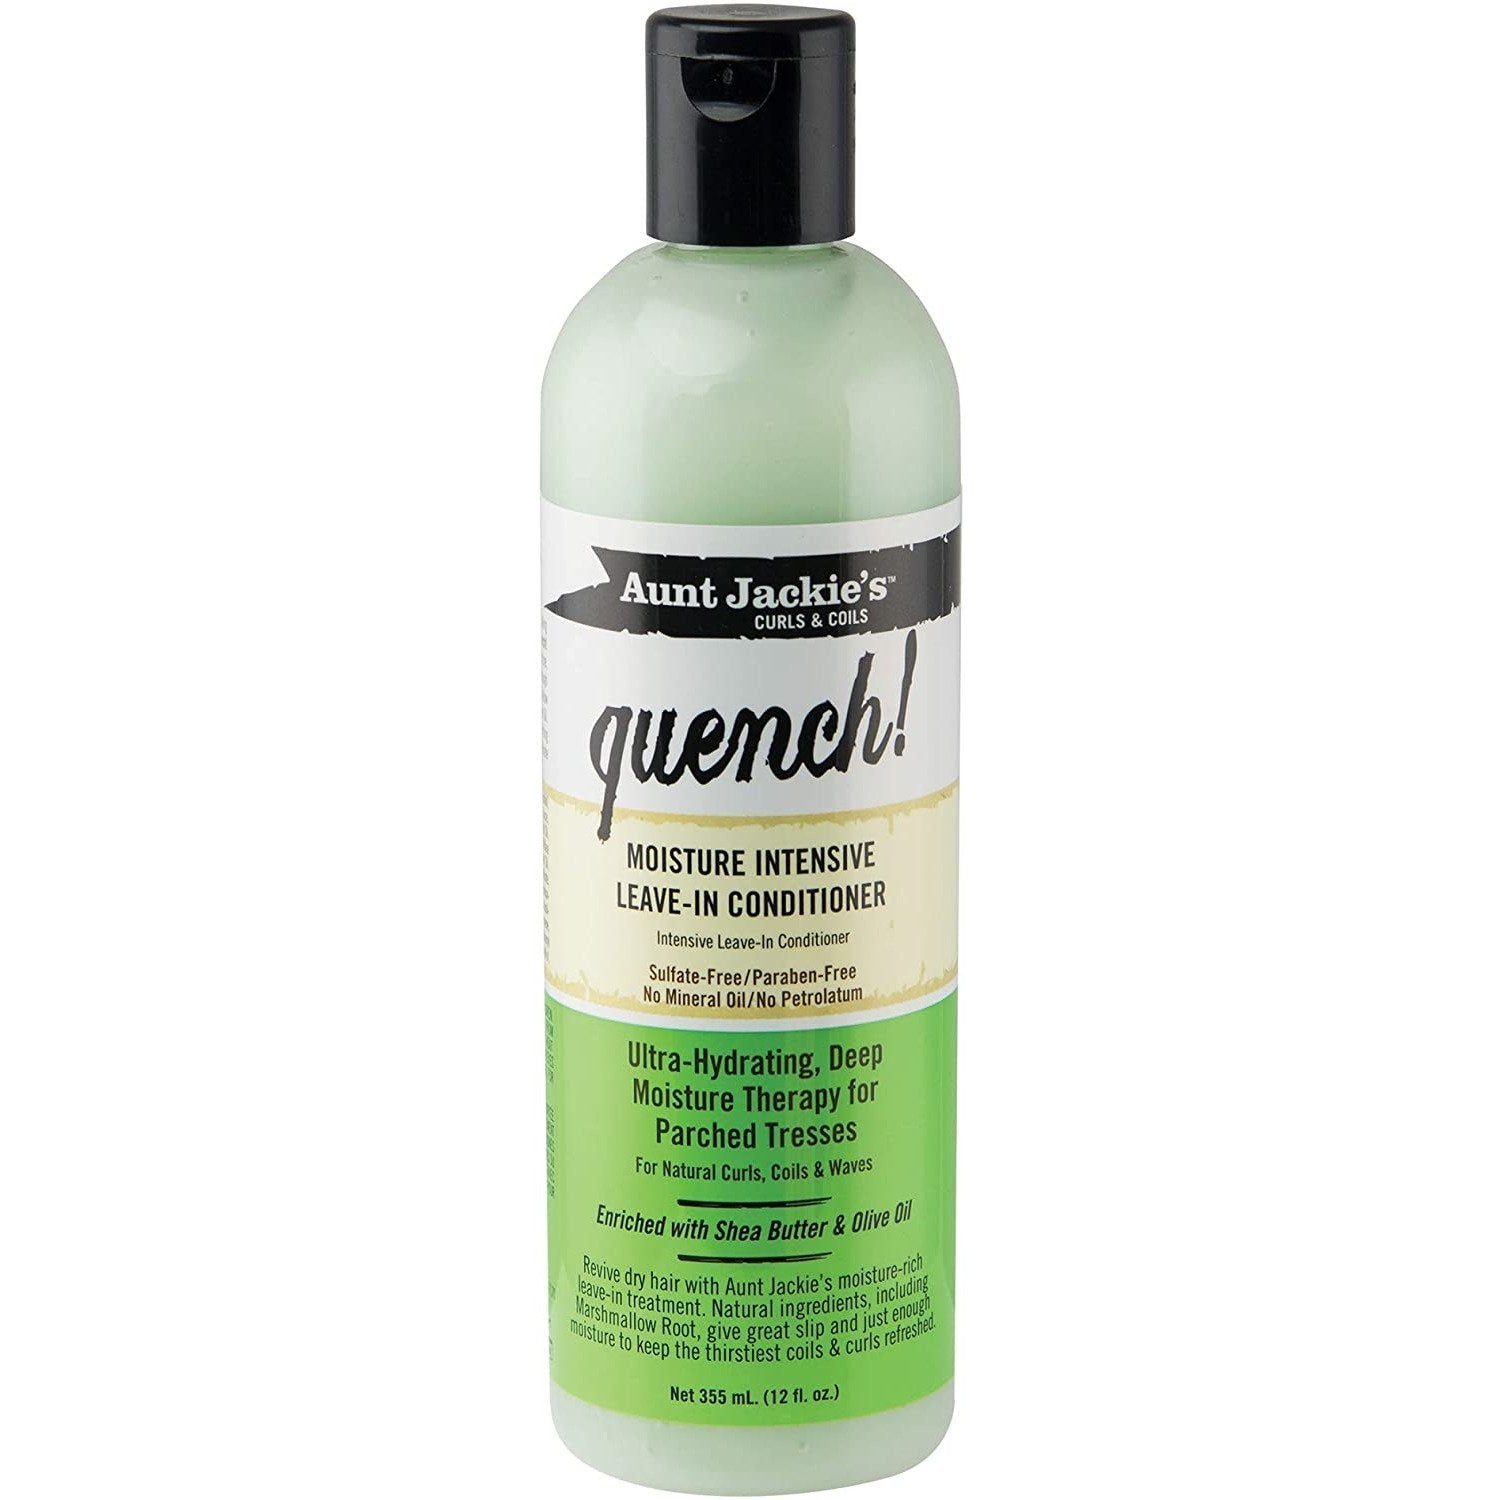 AUNT JACKIES "QUENCH!" LEAVE-IN COND 12oz-Aunt Jackie's- Hive Beauty Supply